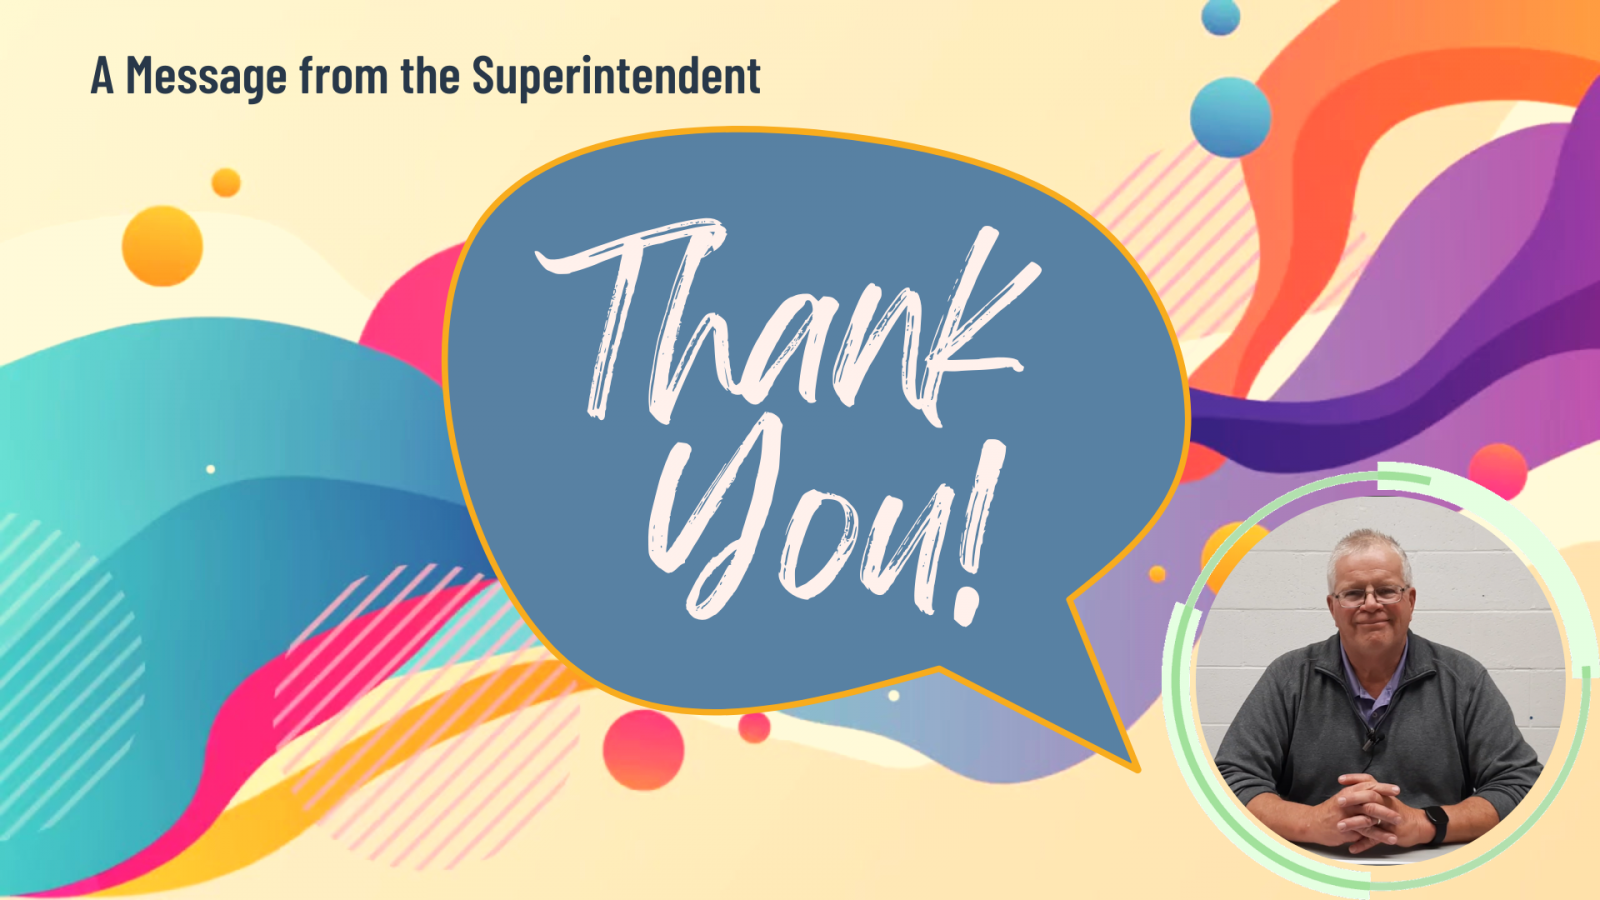 An image with the text "A Message from the Superintendent. 'Thank You!'" and a picture of Mr. Steve Dickerson.